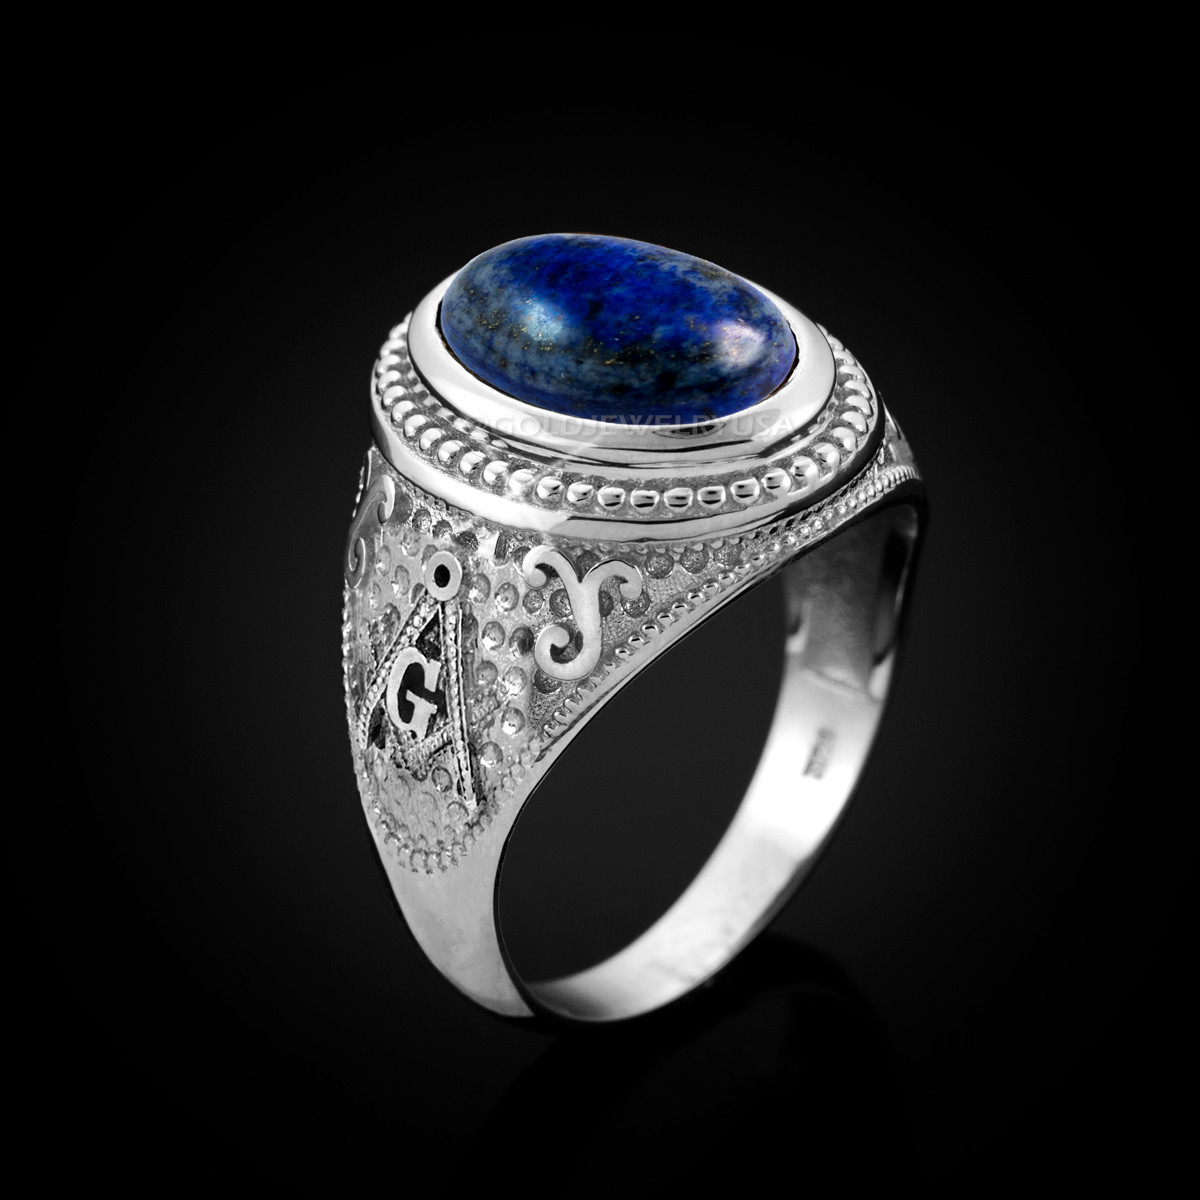 Amazon.com: Natural Blue Lapis Lazuli 925 Solid Sterling Silver Men's Ring  Size 8, 9, 10, 11, 12, 13 : Handmade Products